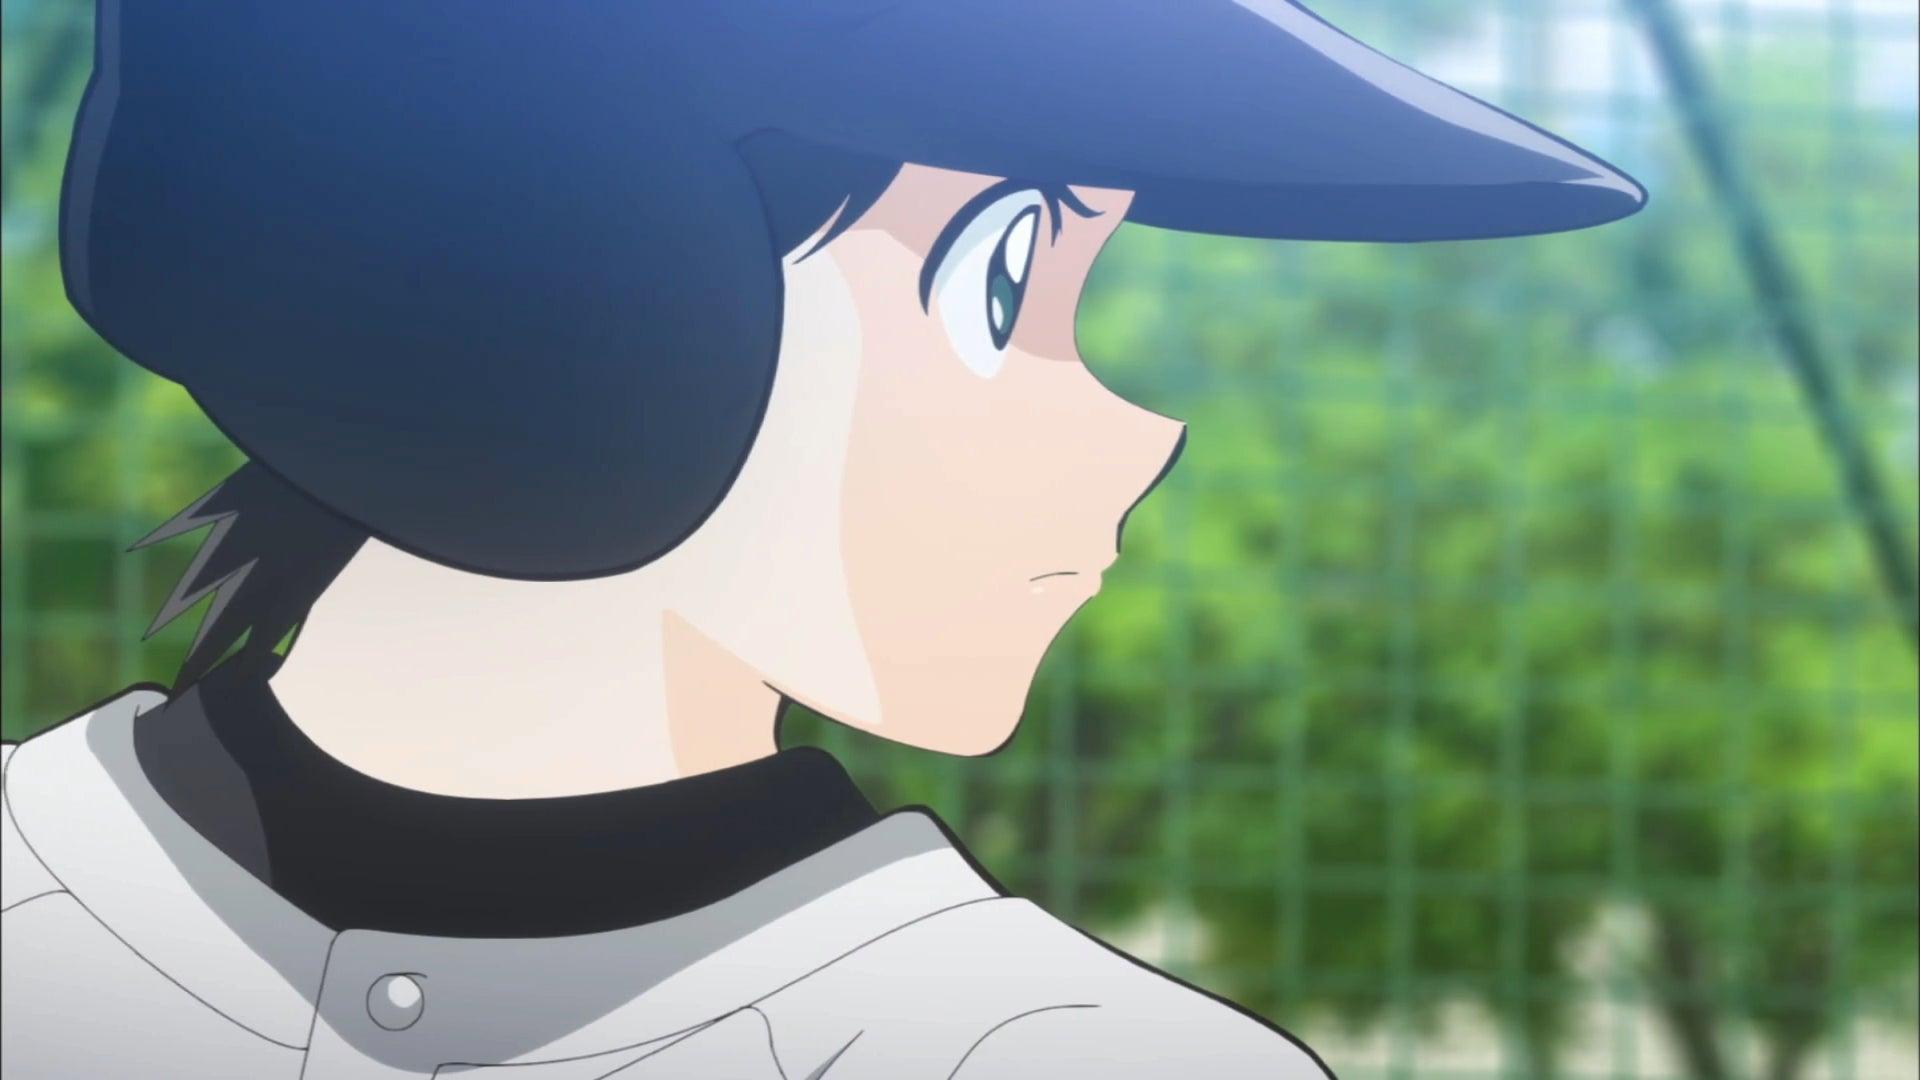 Best baseball match of the year [Mix: Meisei Story] : anime